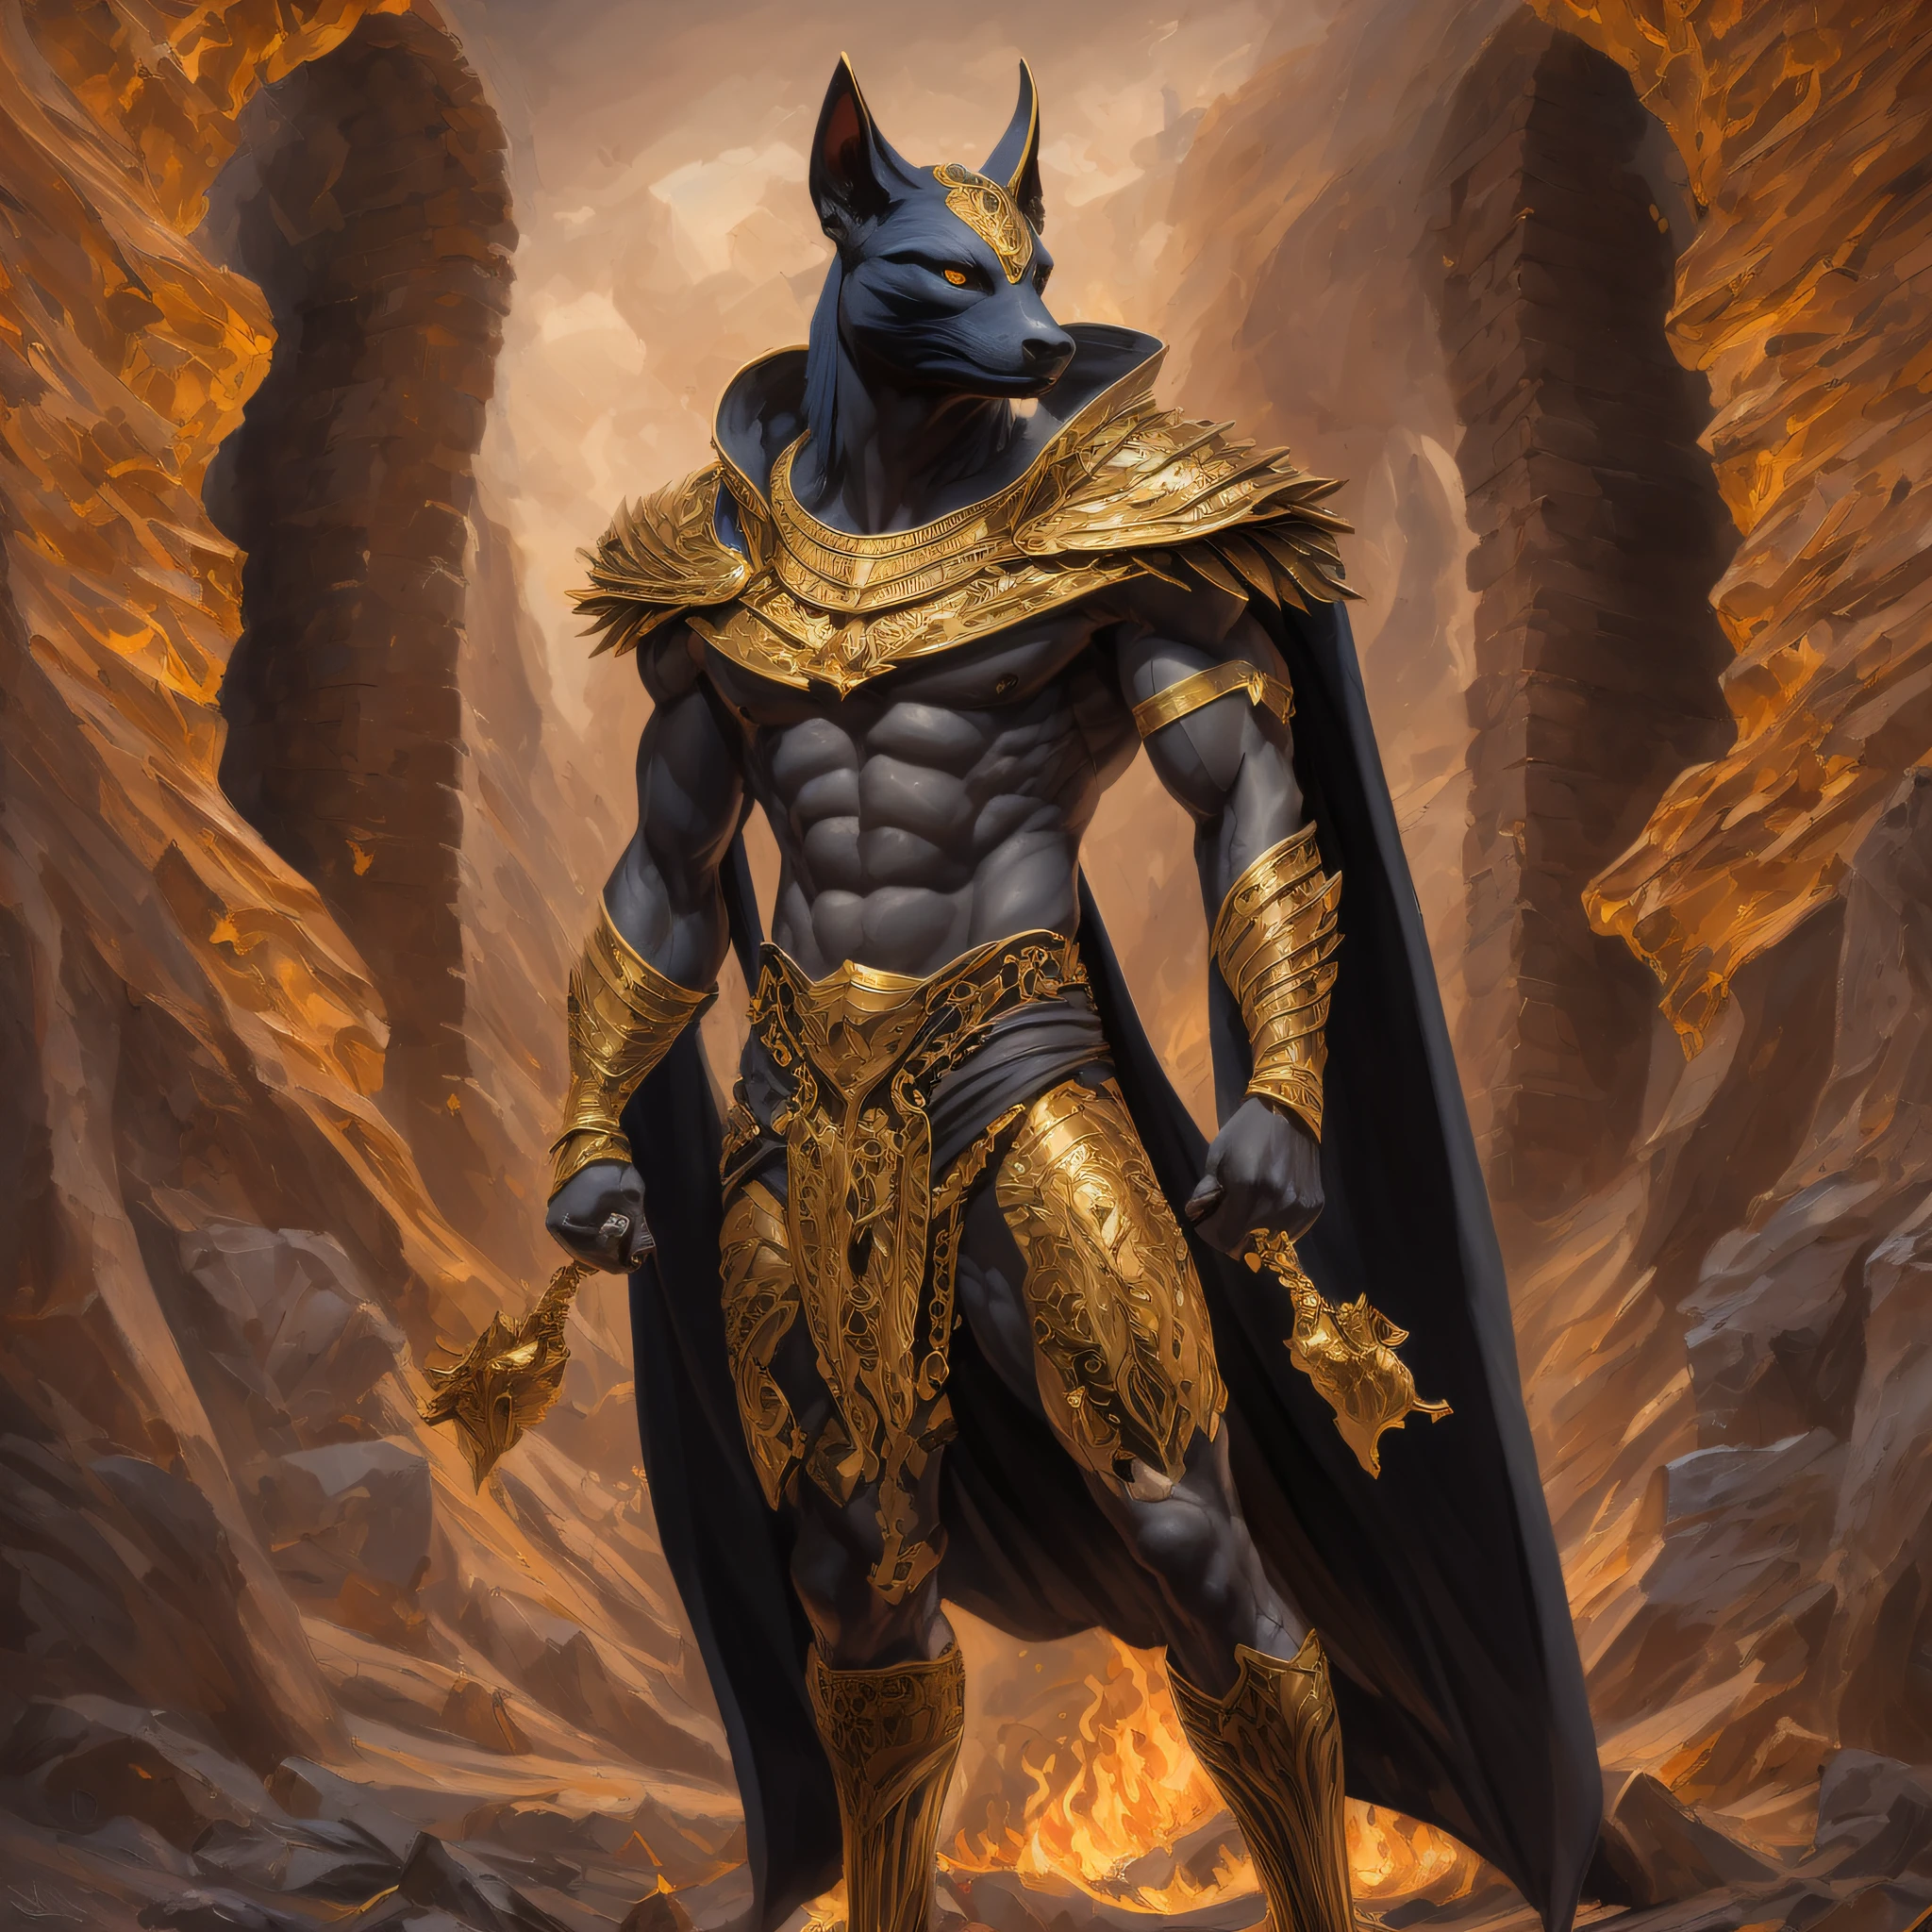 (high quality), photorealistic, (oil painting) jewelry, (solo), (dynamic pose), towards right, ((hell gate)), fire, hell landscape, (the underworld), (dark landscape), anubis, egyptian jackal headed god, anthro, muscular, (holding golden scales), dynamic pose, cinematic, dramatic camera angle, golden armor:0.25, black & gold cape, (good anatomy), (good proportions), award winning, masterpiece, centered,